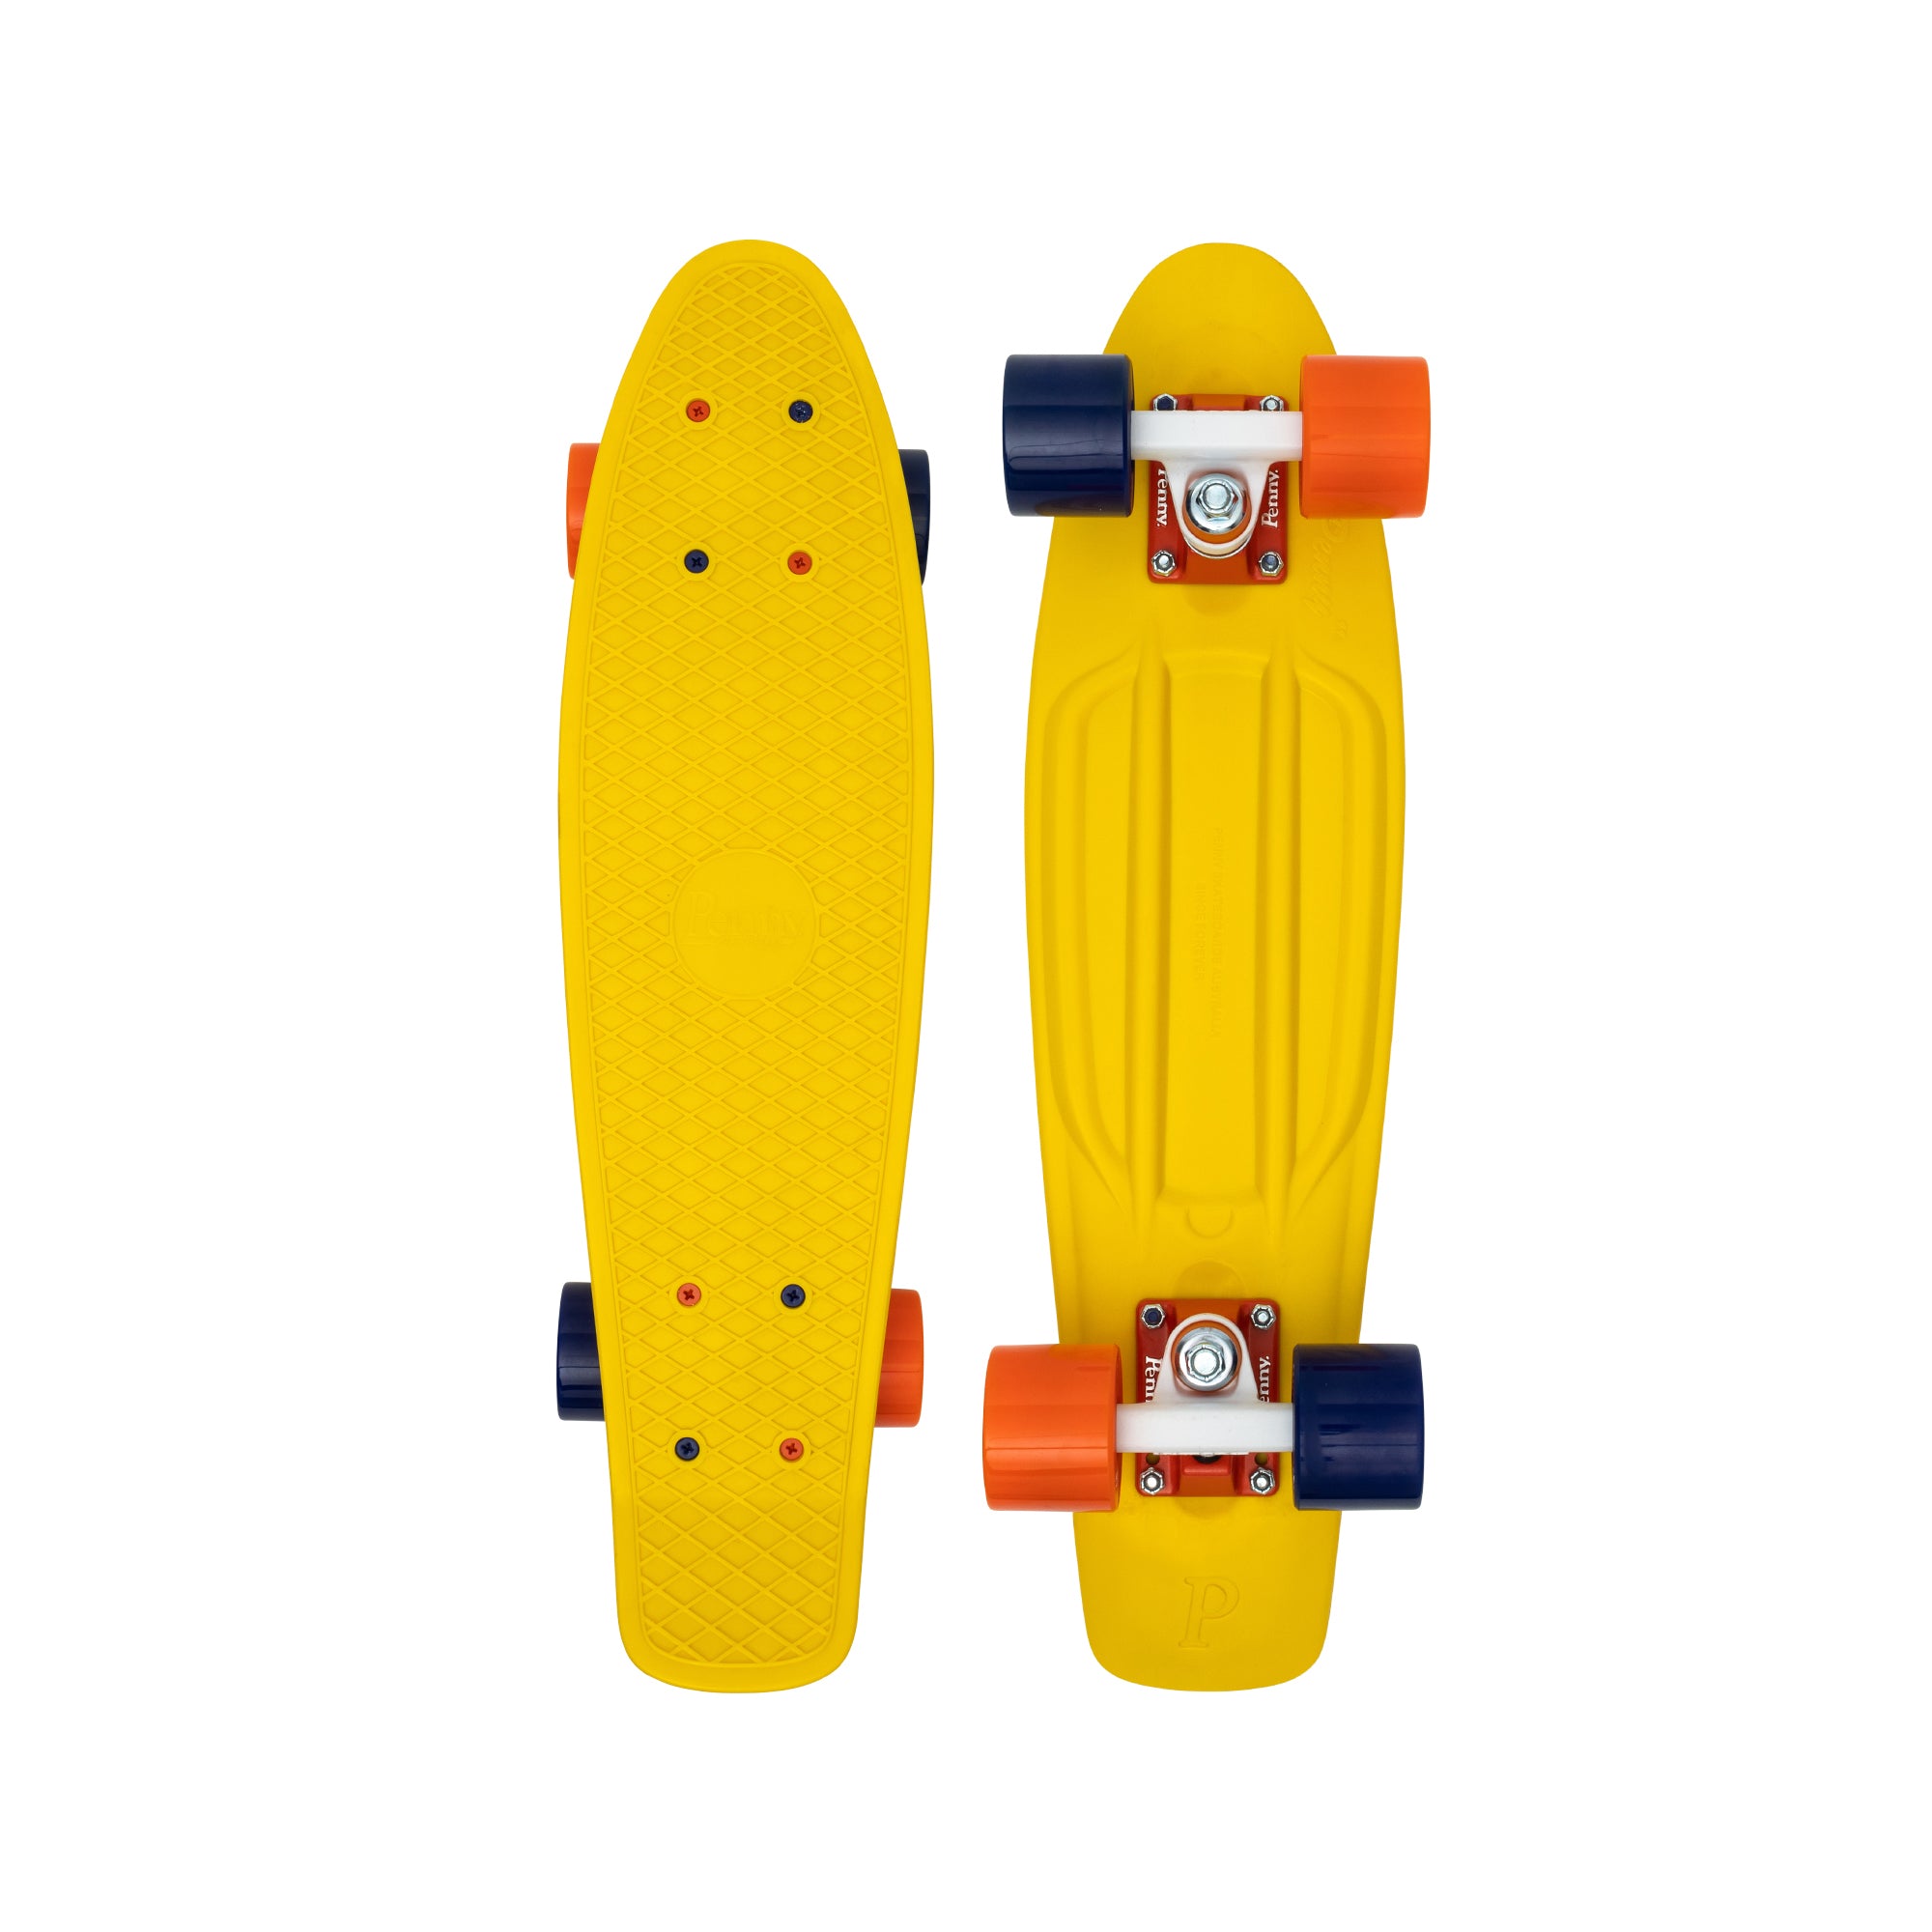 The Champ 22" Penny Board Complete Cruiser by Penny Skateboards